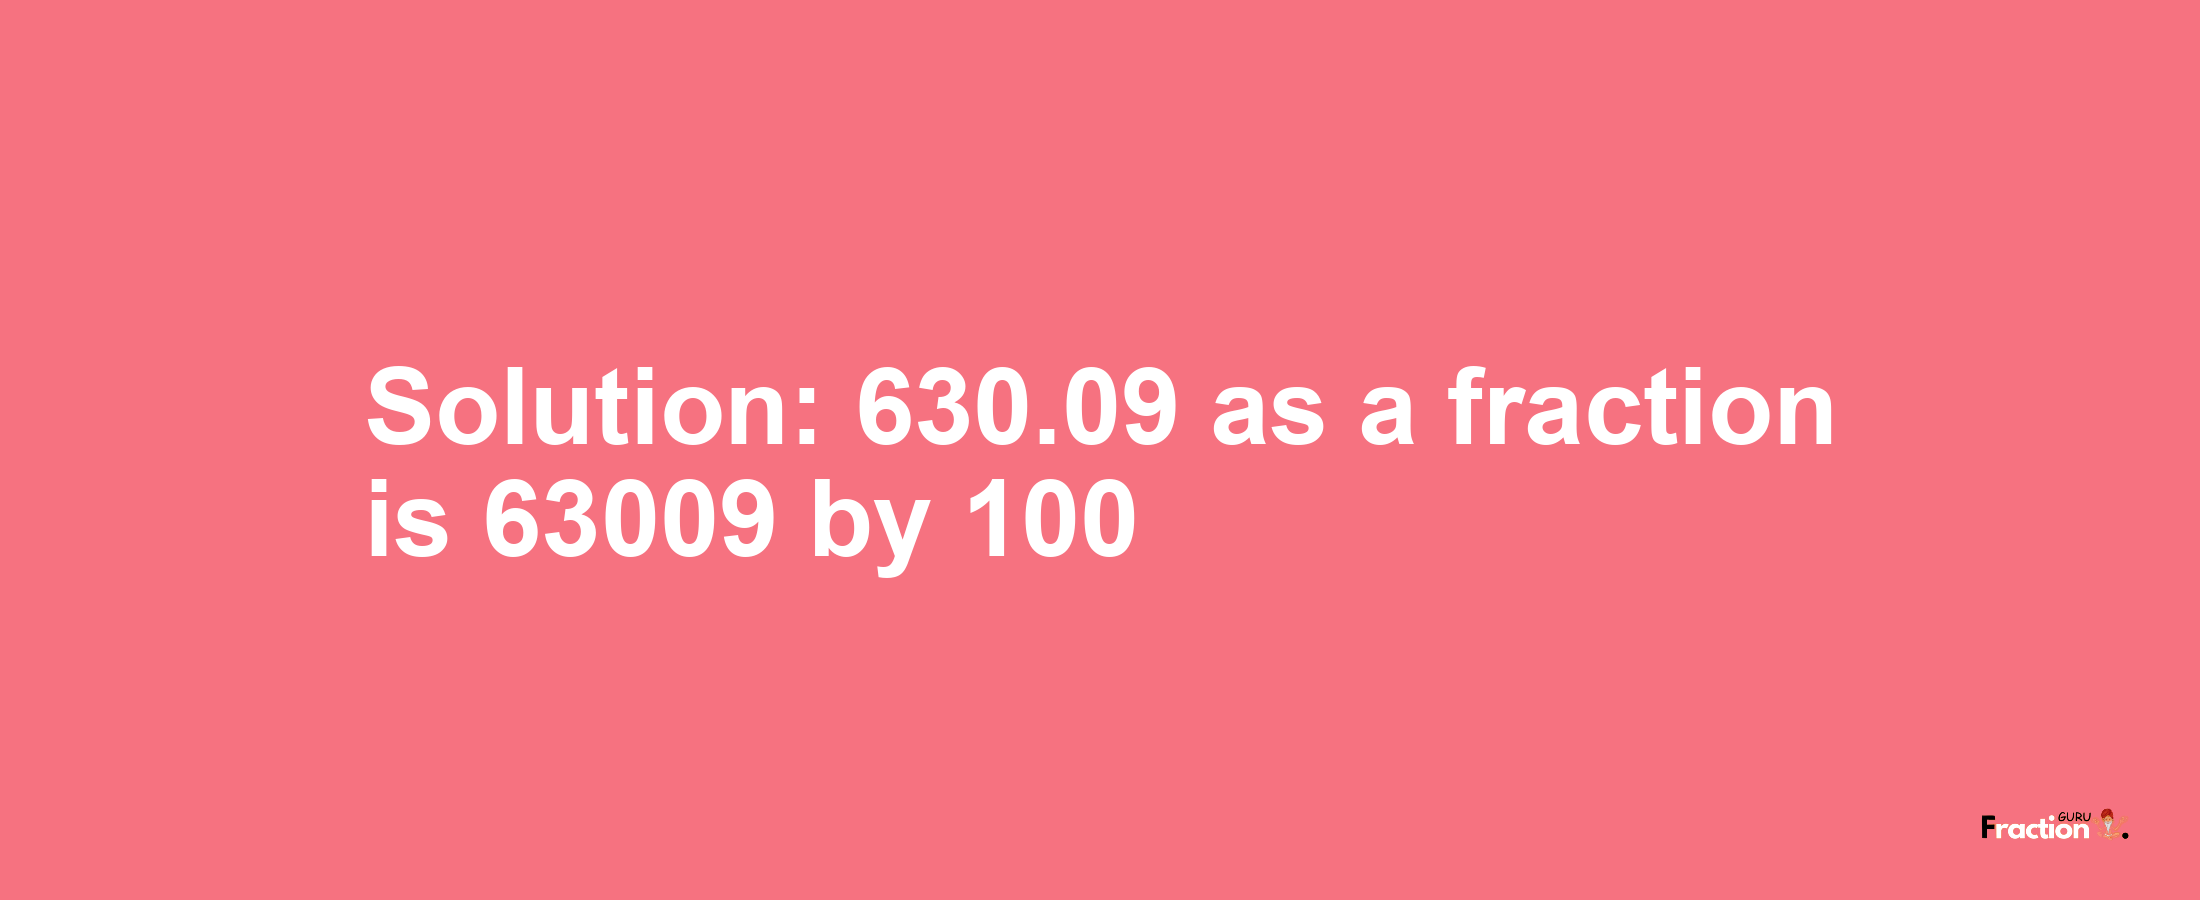 Solution:630.09 as a fraction is 63009/100